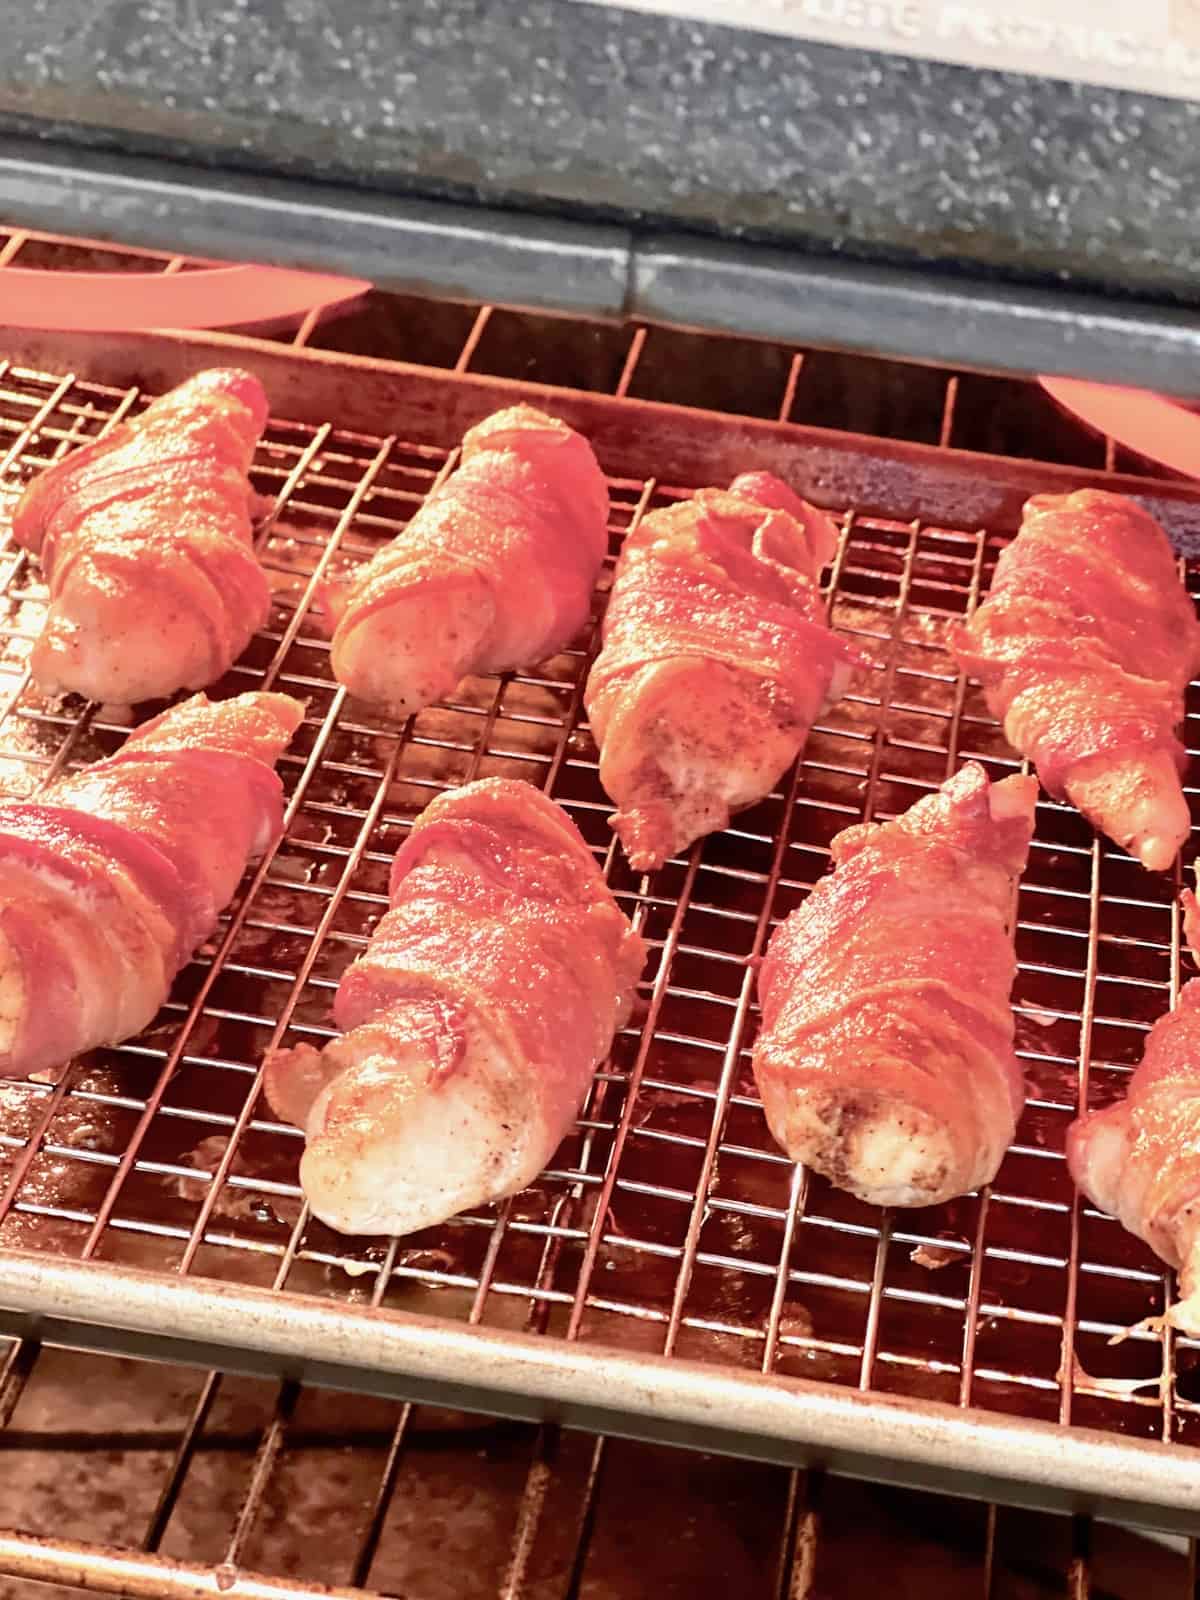 A tray of chicken under the broiler to make bacon crispy.